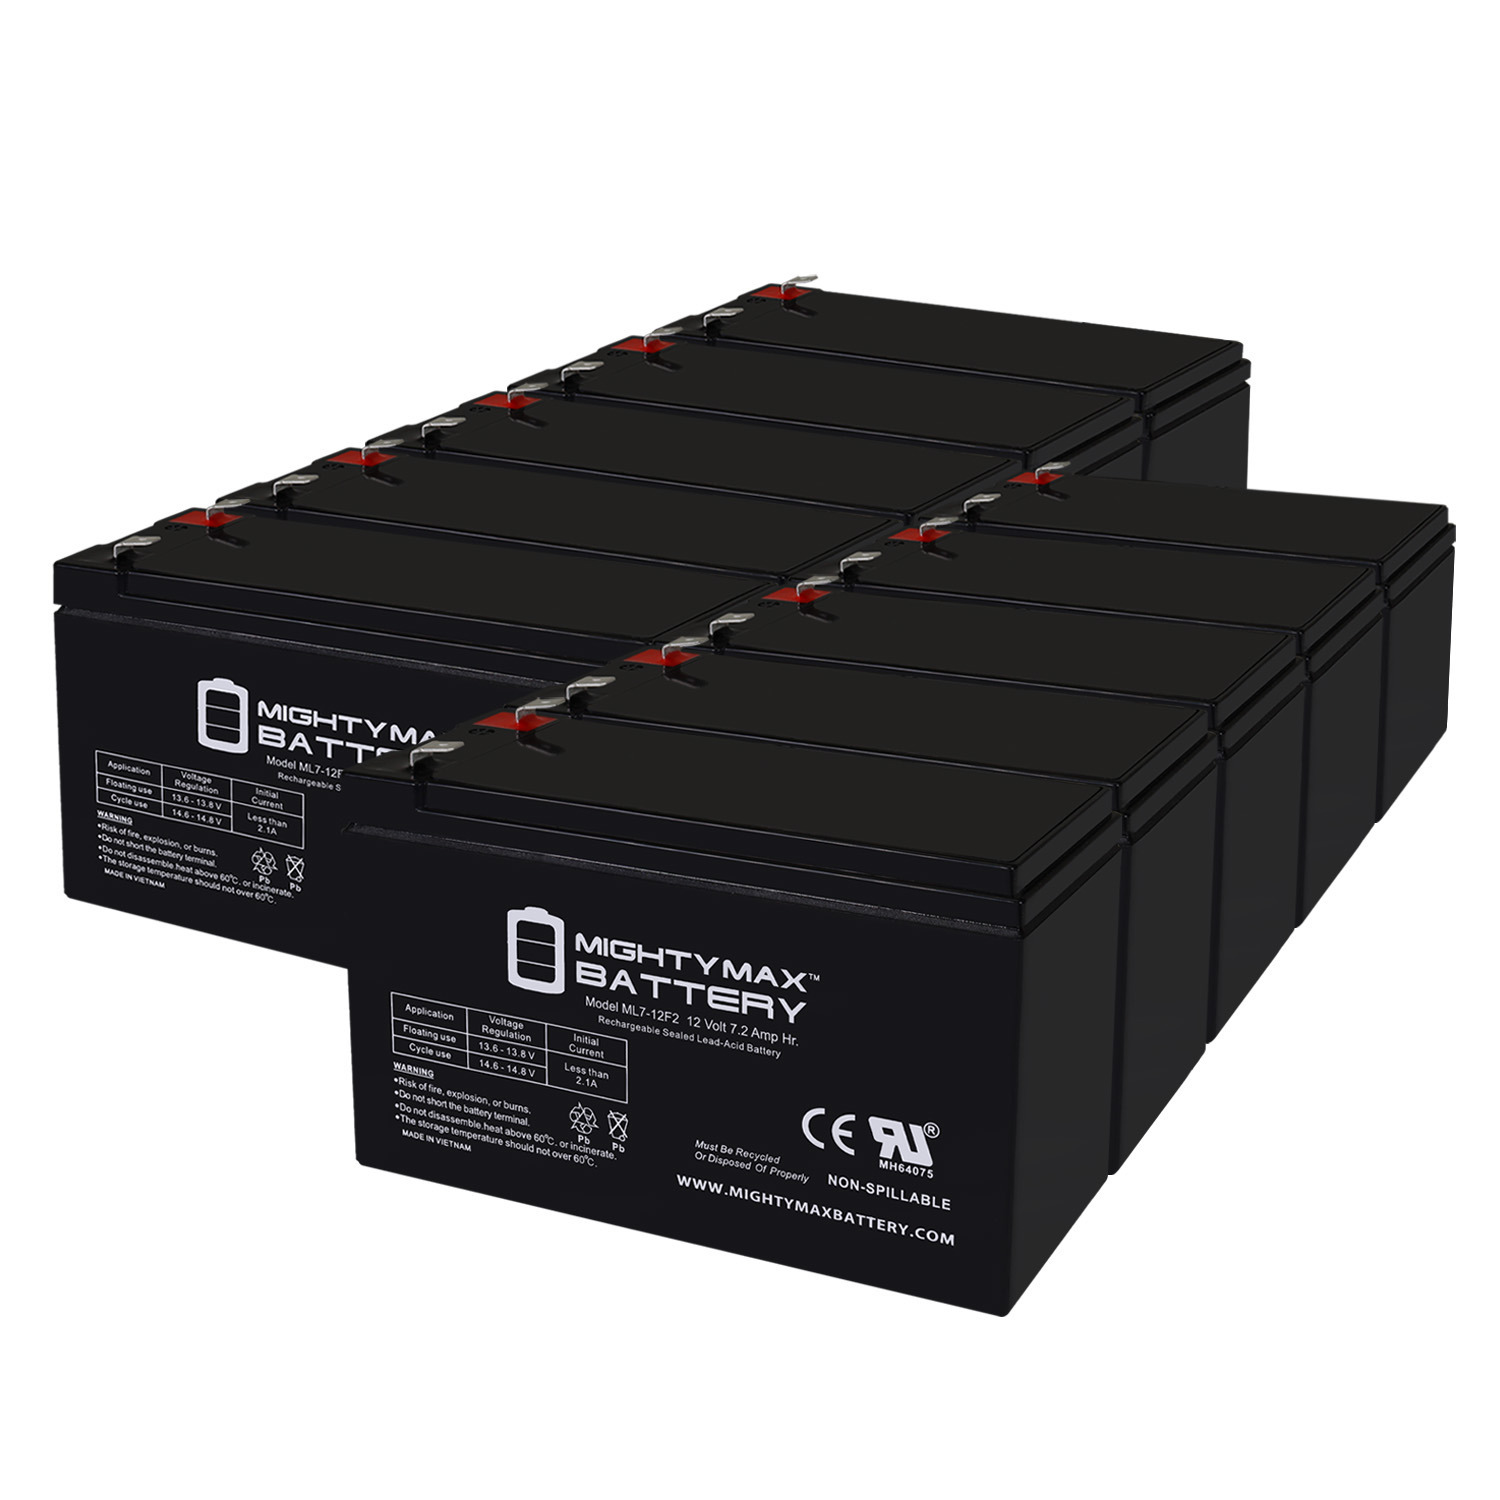 12V 7Ah F2 Replacement Battery for APC SMT1000RM2UTW - 10 Pack